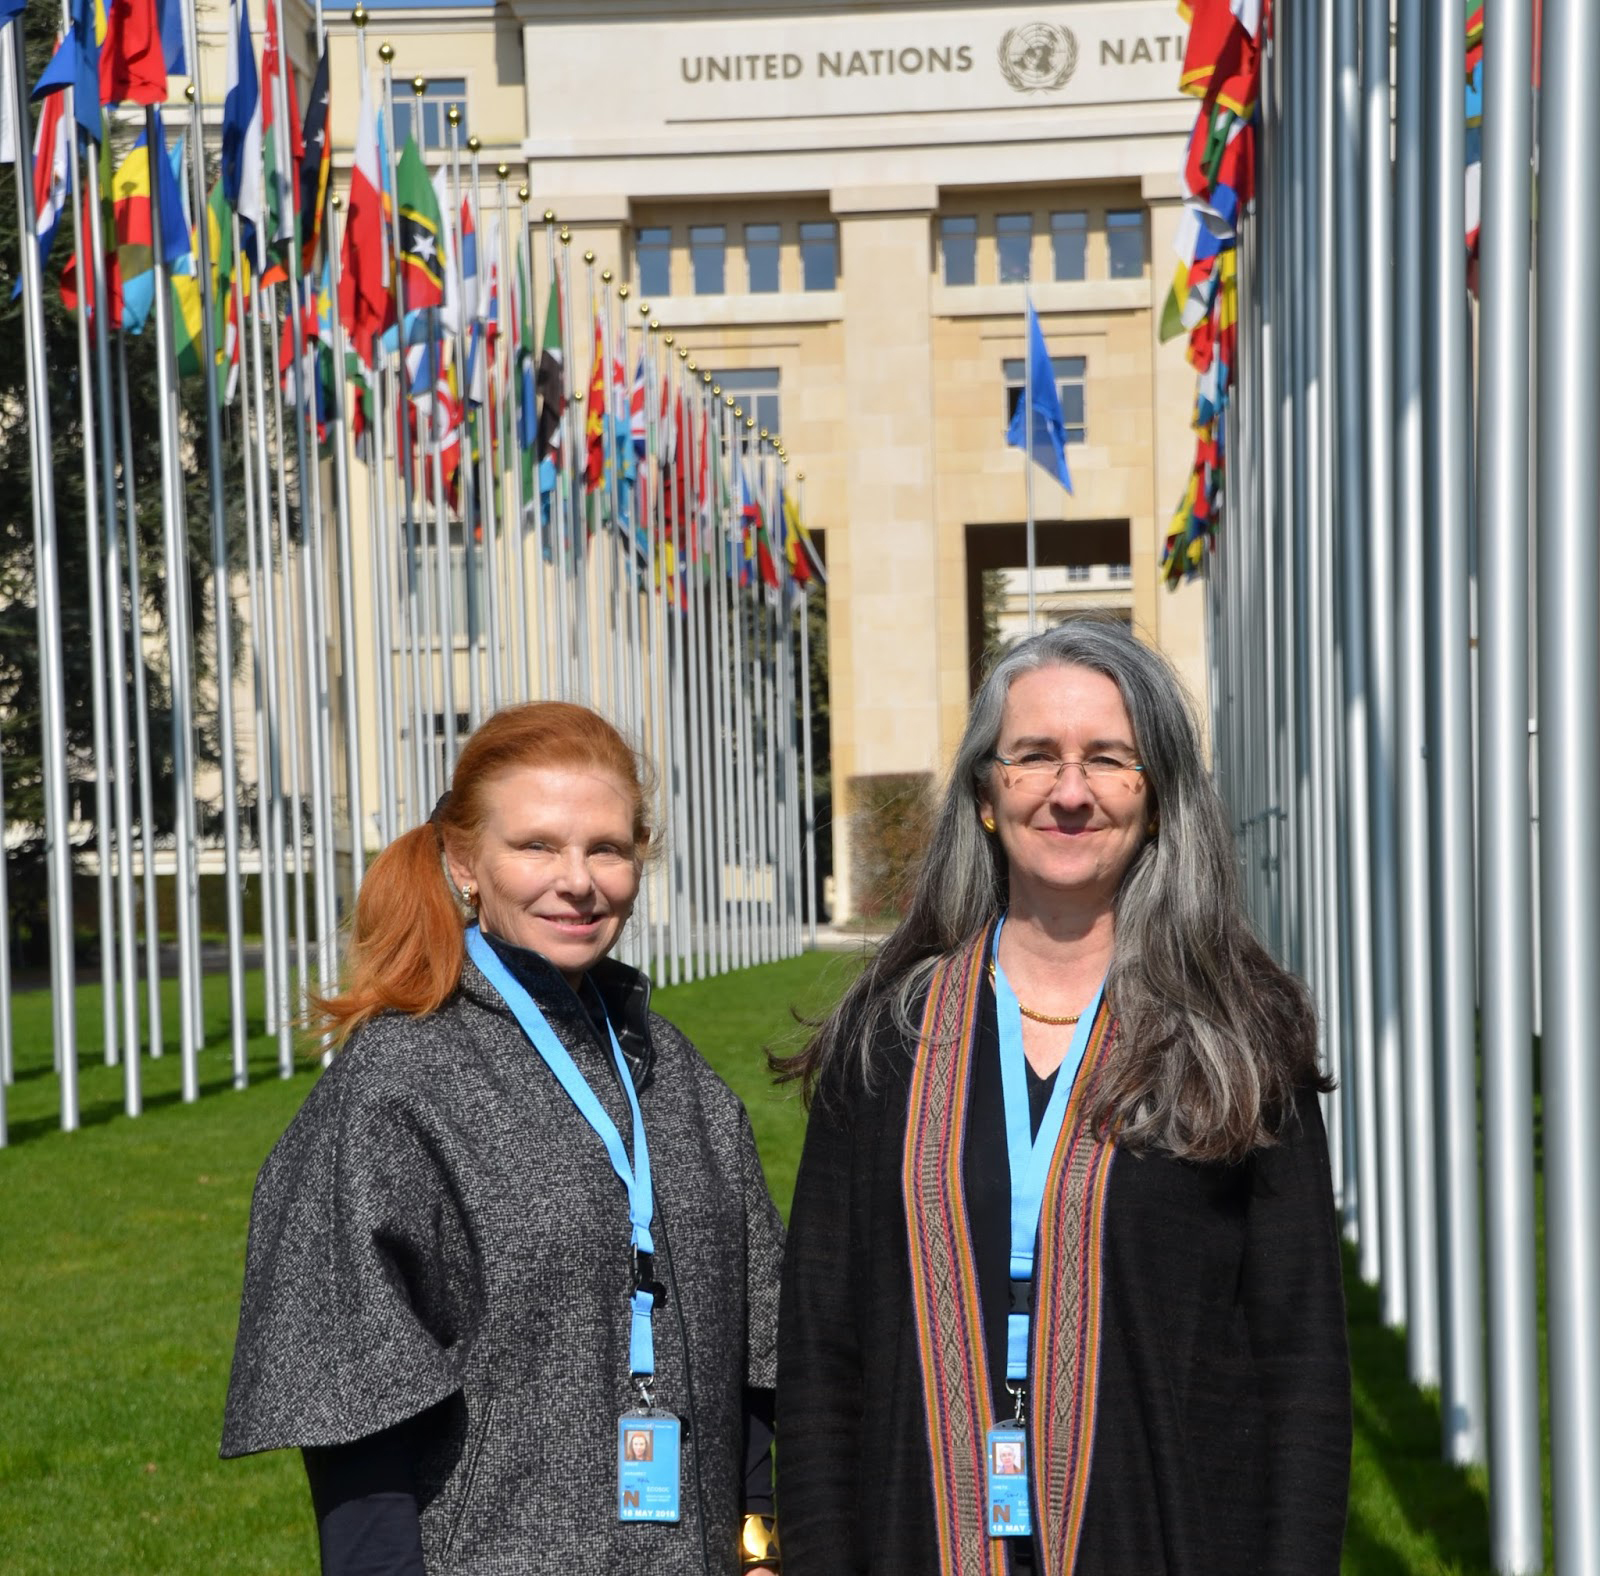 Greta Friedemann-Sánchez (right), Ph.D., associate professor in the U's Humphrey School of Public Affairs, and Peggy Grieve, J.D., graduate student in Humphrey’s Master of Public Affairs Program, outside of the Palace of Nations, home to the United Nation